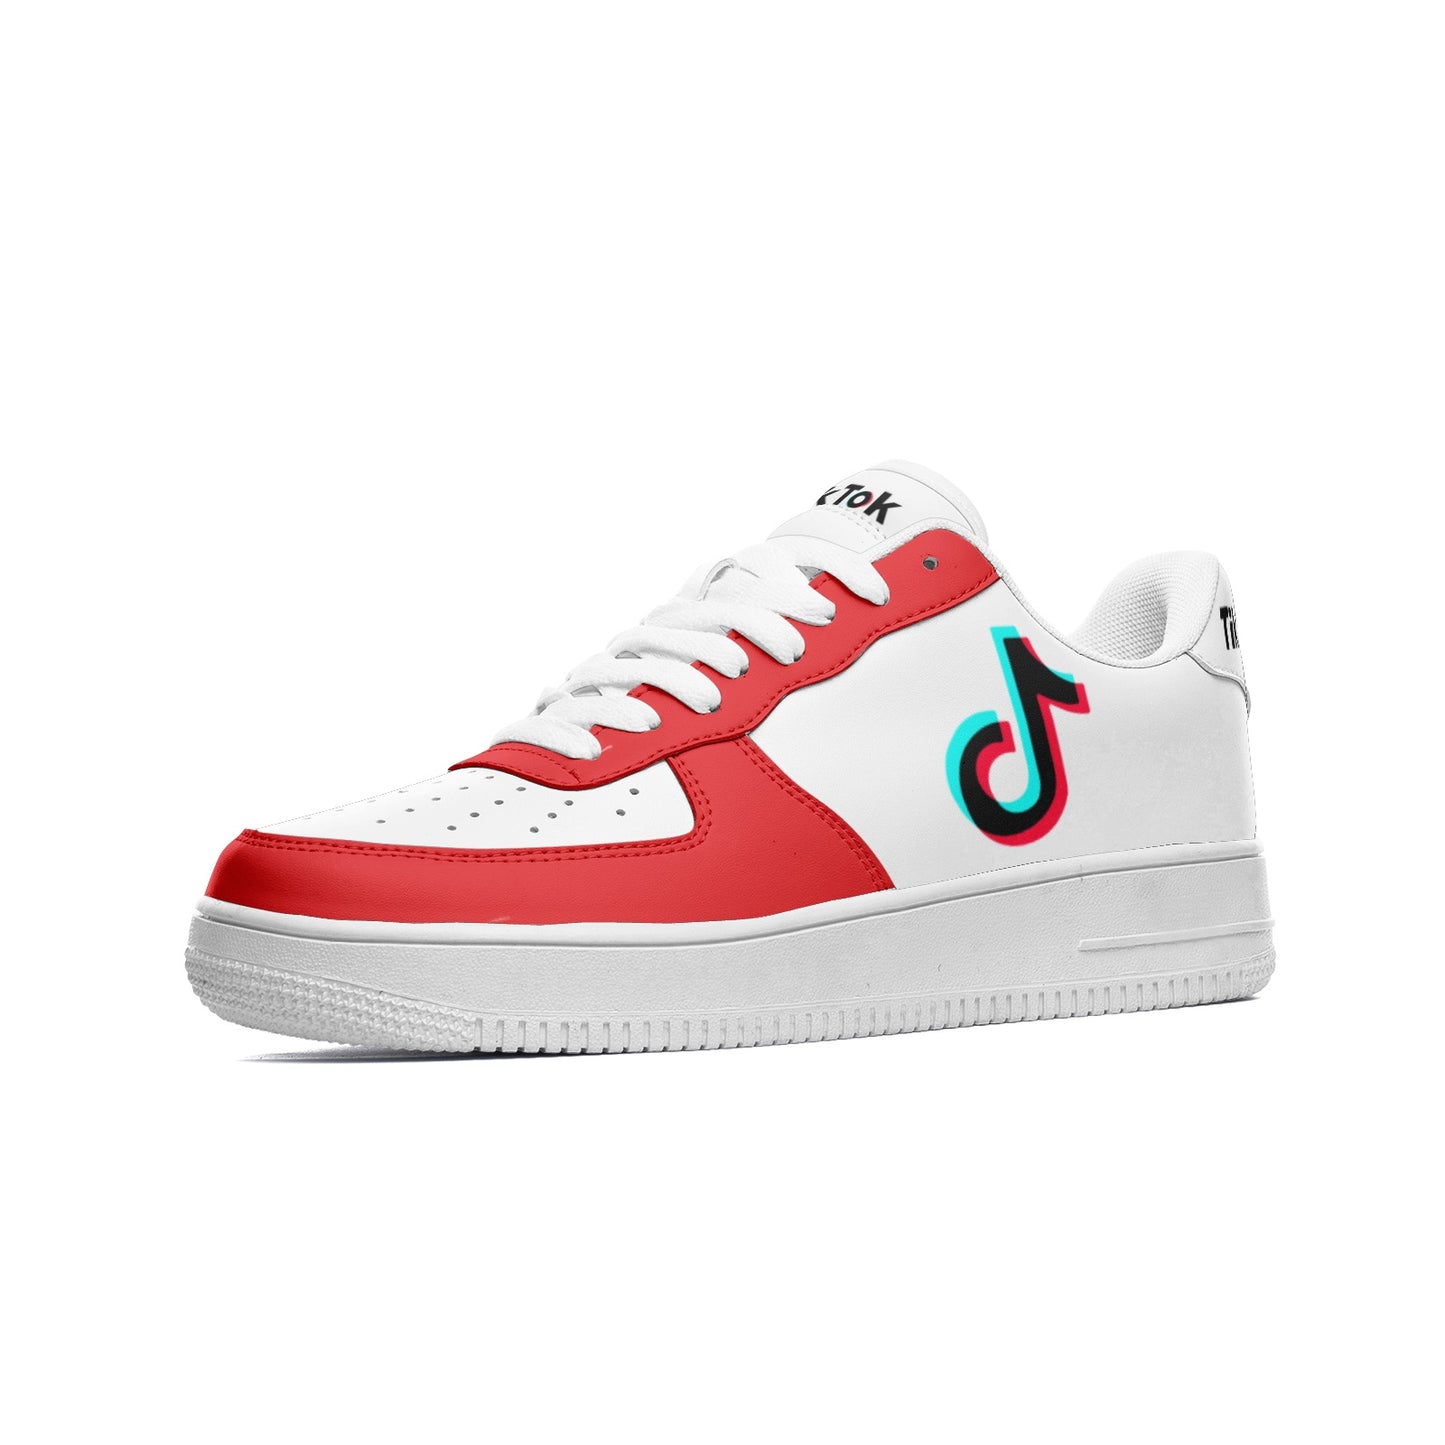 TikTok Unisex Low Top Leather Sneakers - Red - SD-style-shop